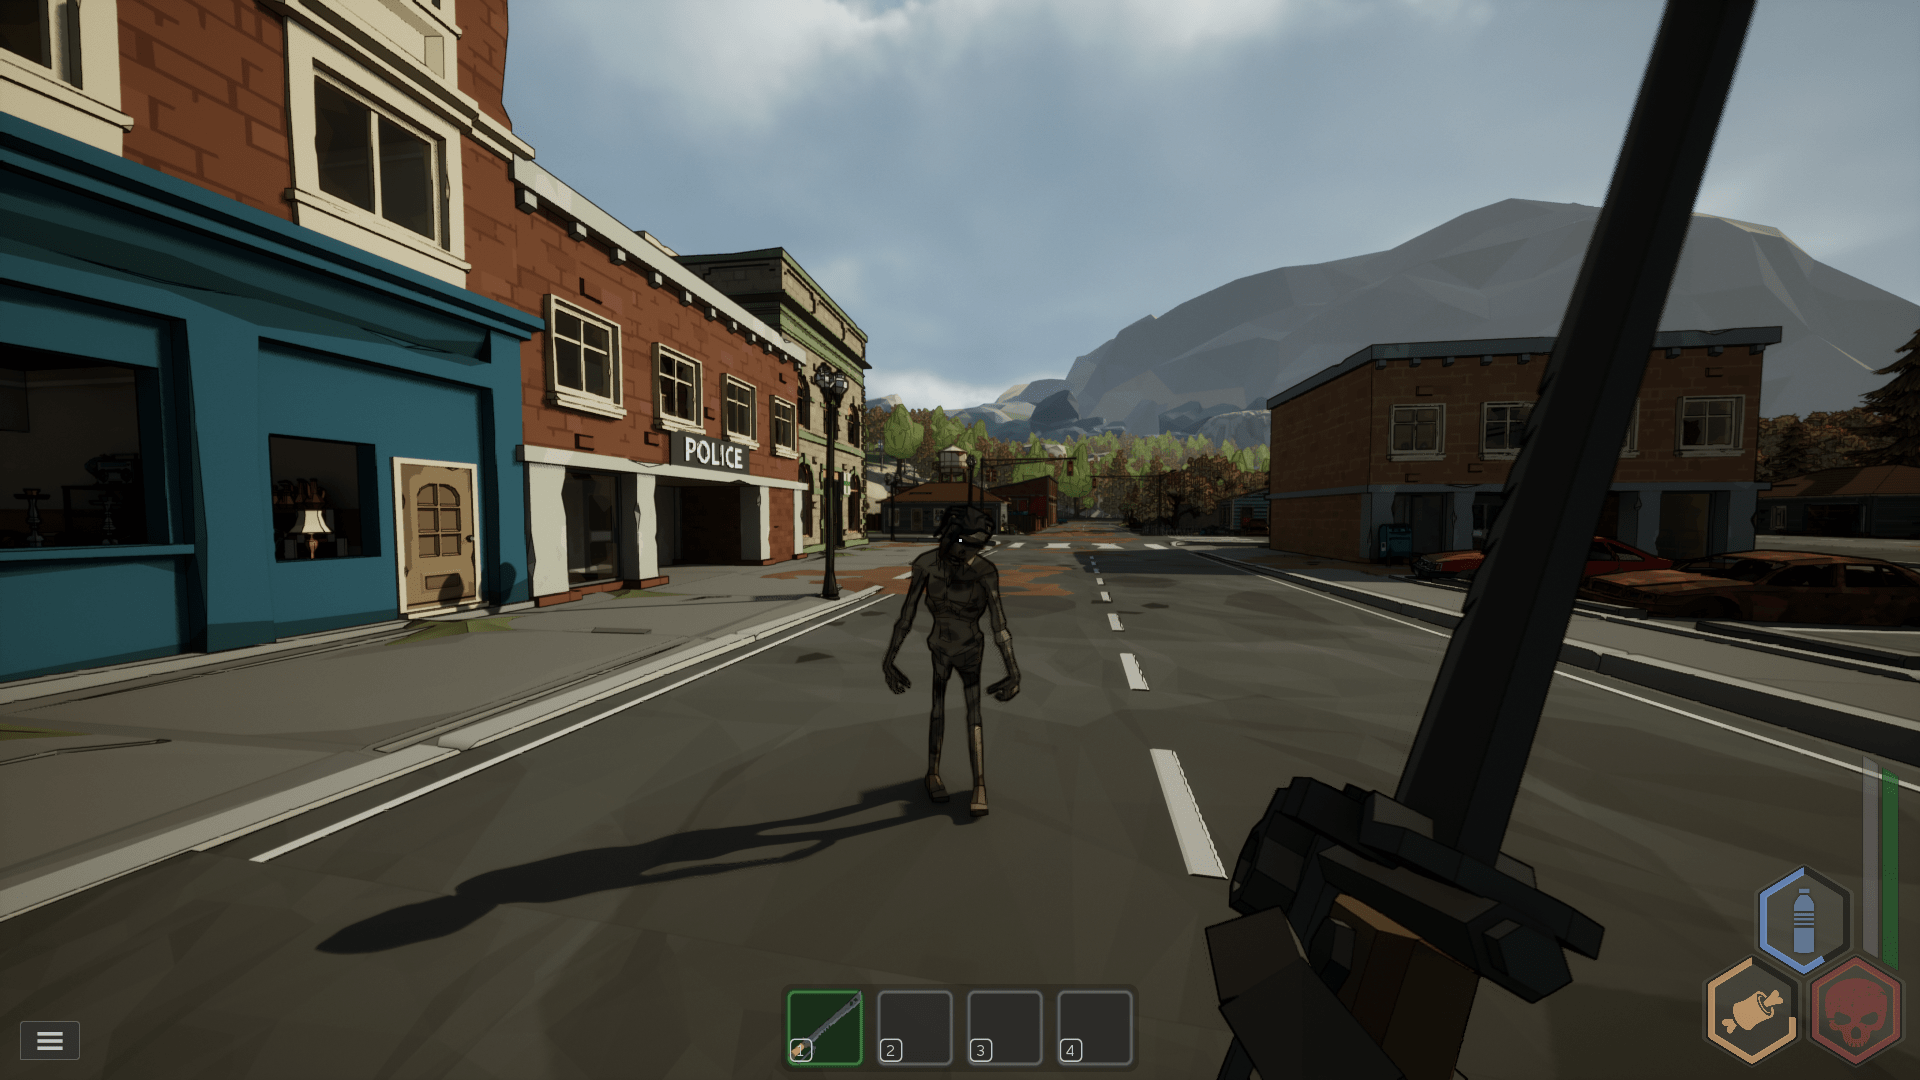 Zombie attacking player with big machete in small town.